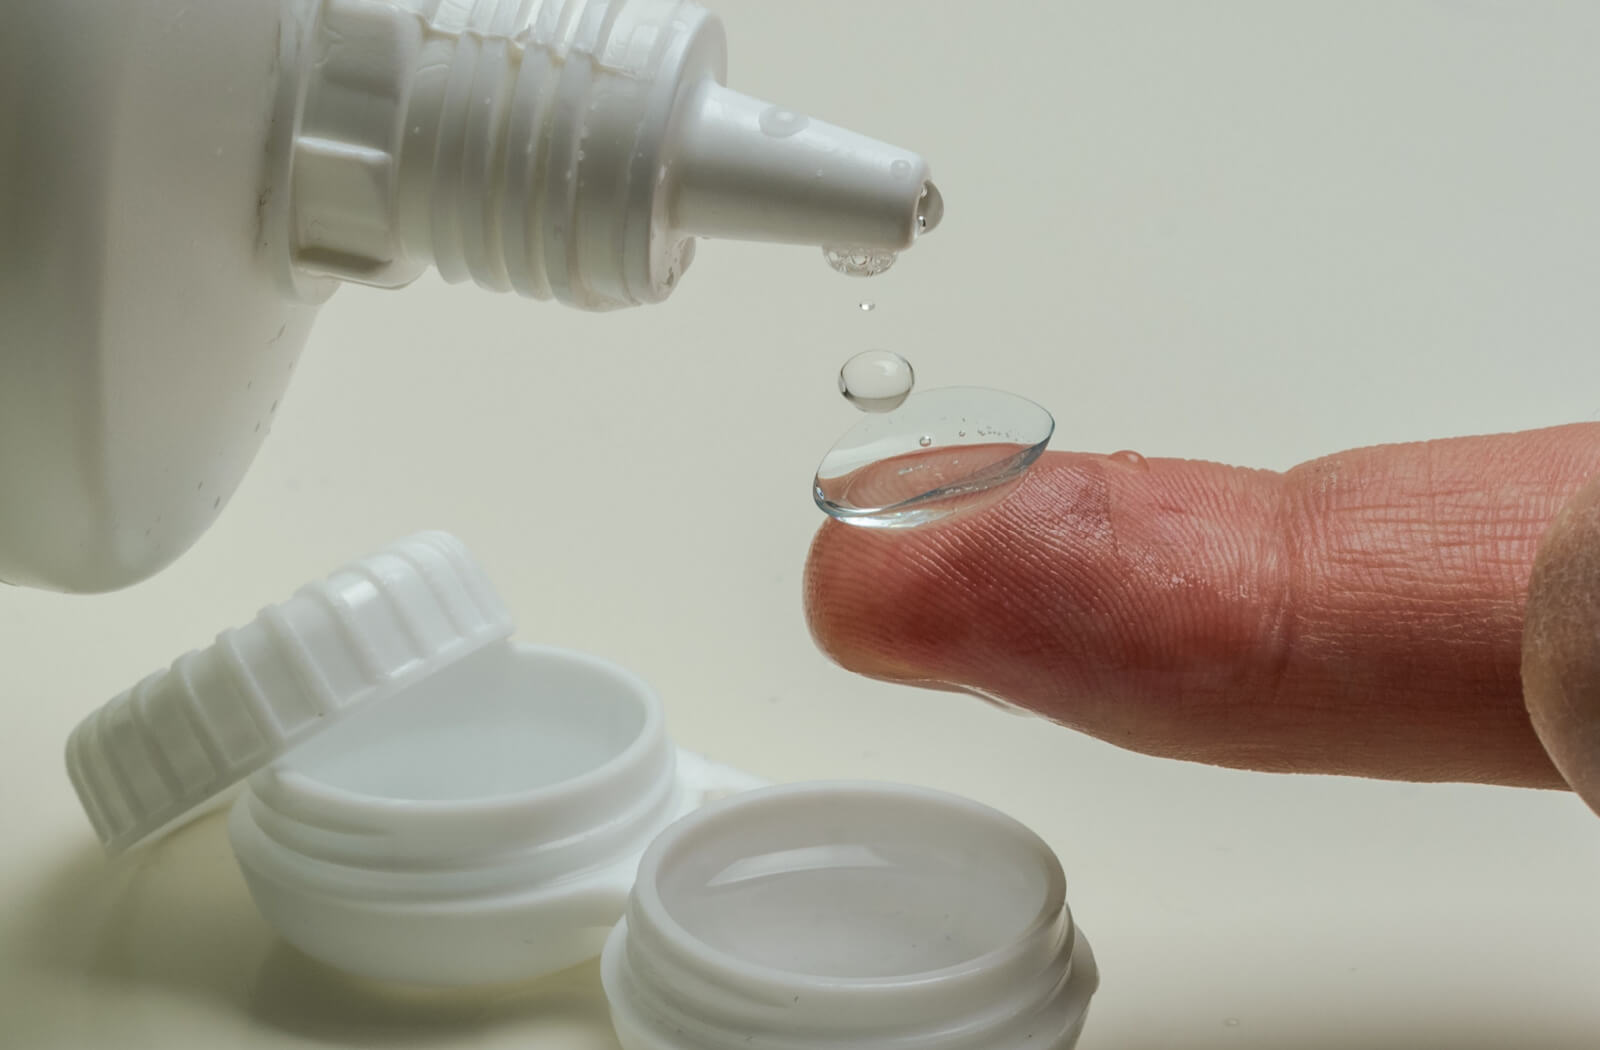 Surprising Hack: Use Eye Drops Instead Of Contact Lens Solution For Storing Contacts!